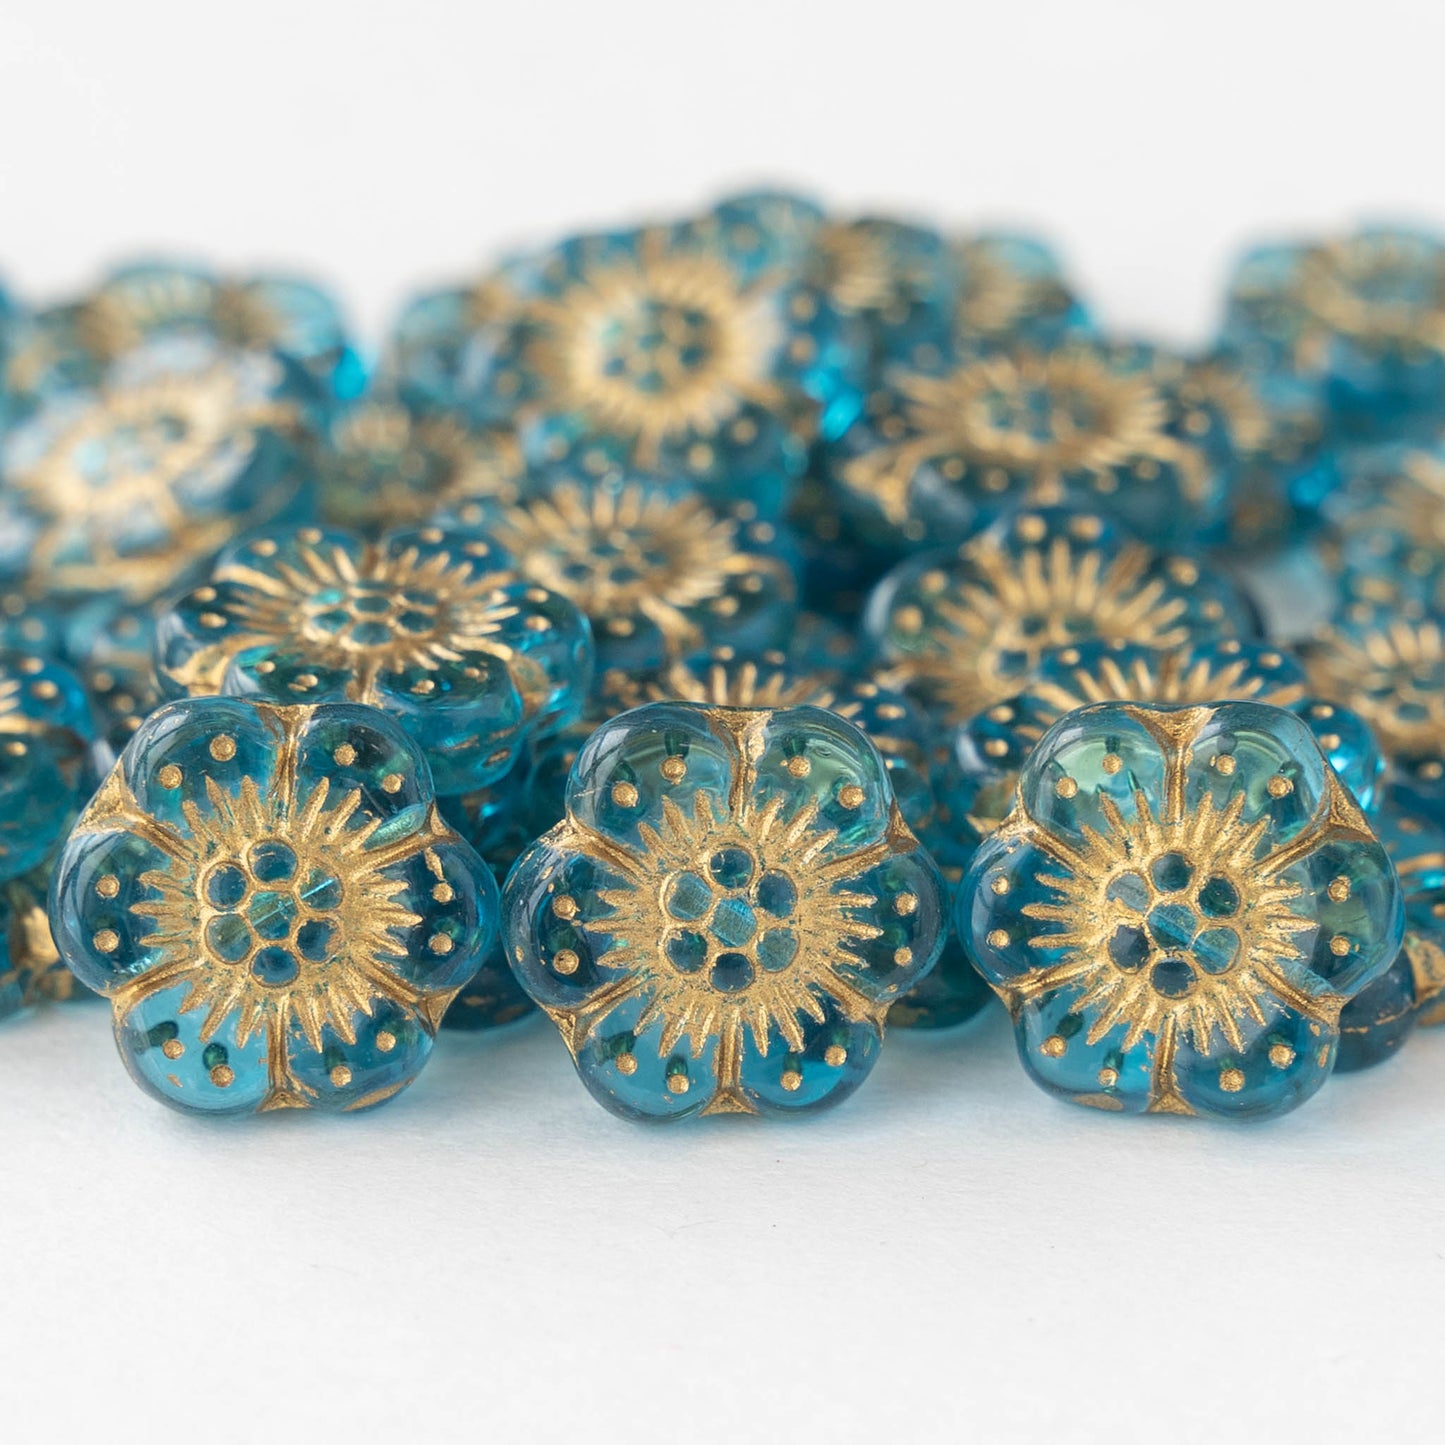 14mm Anemone Flower Beads - Aqua Green  with Gold Wash - 12 Beads